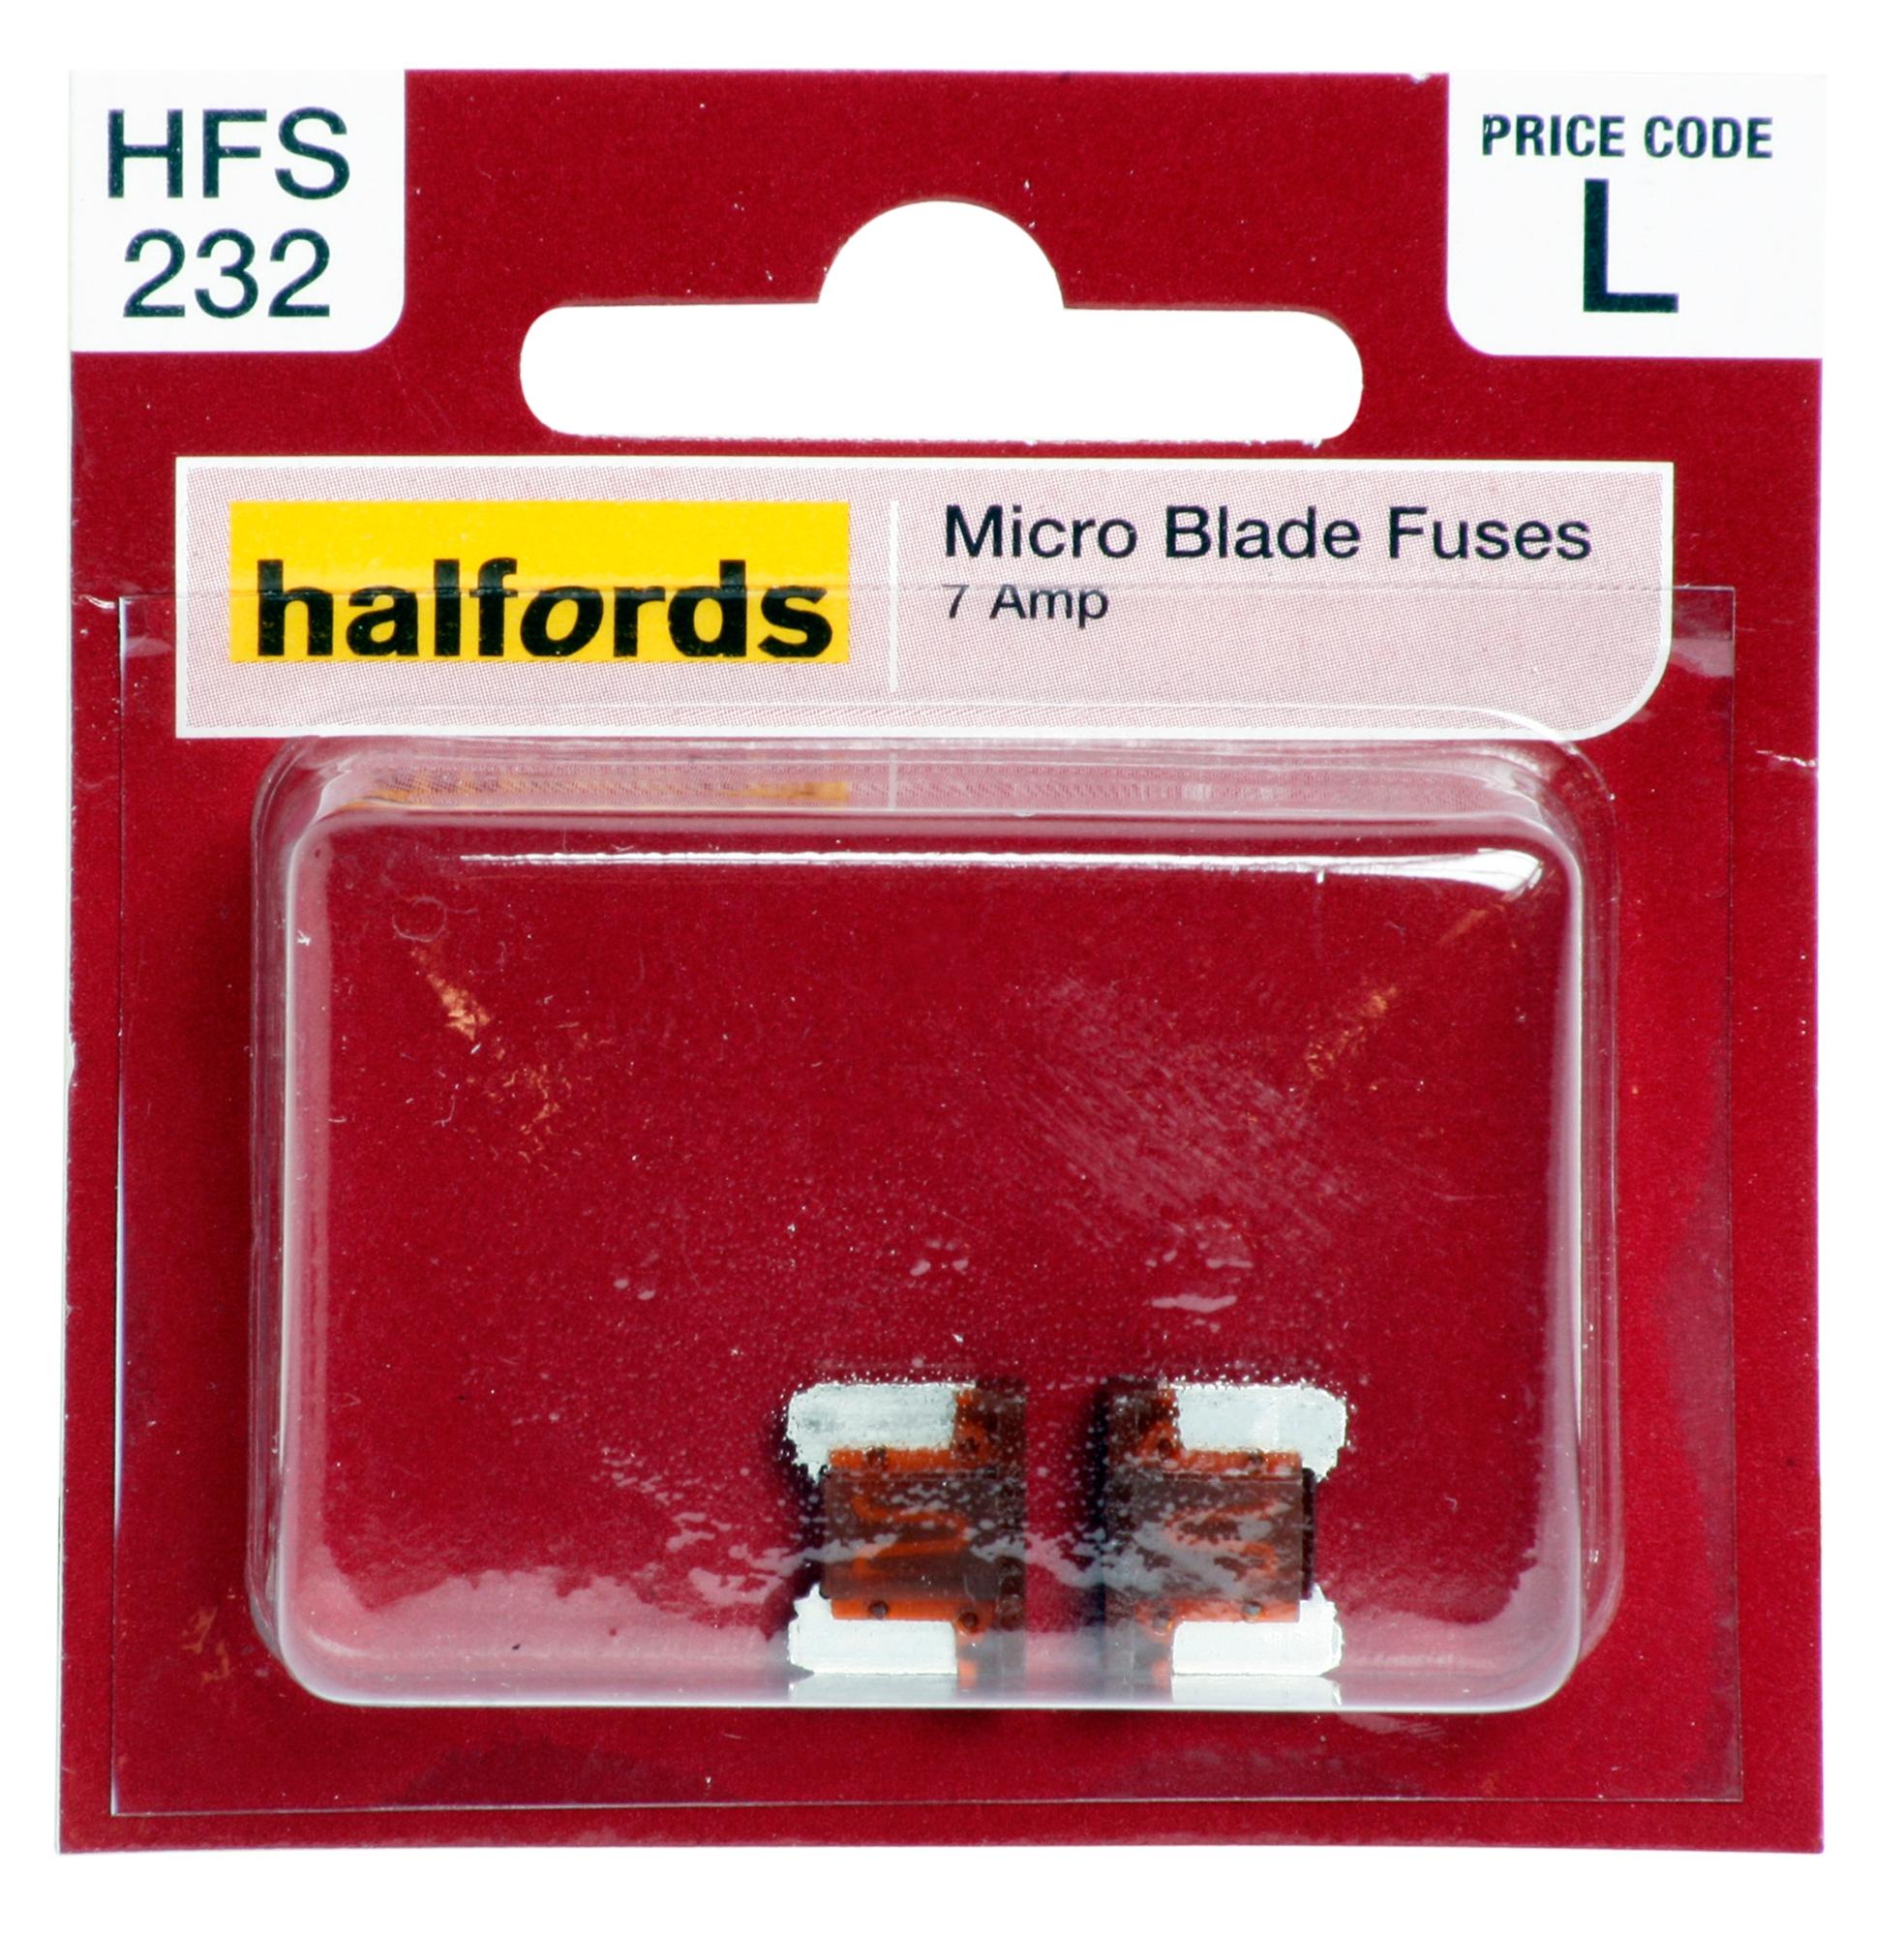 Halfords Micro Blade Fuses 7.5 Amp (Hfs232)